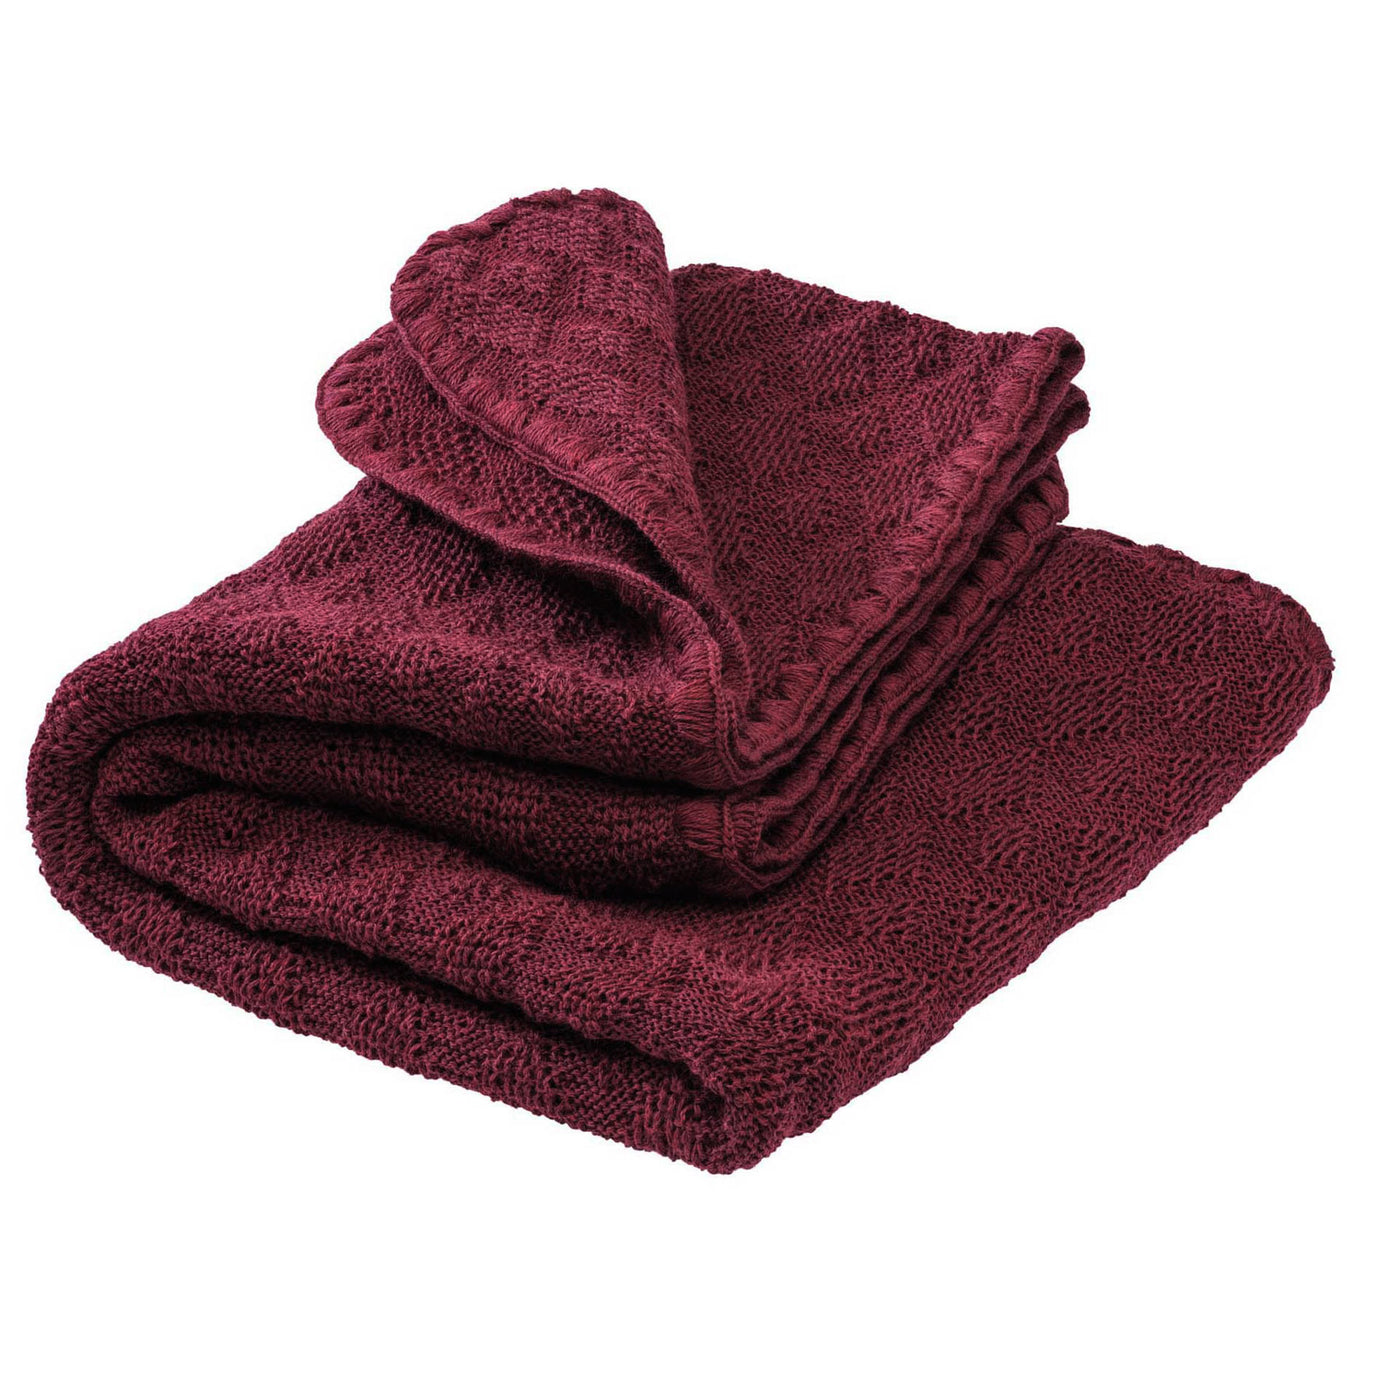 Disana wool baby blanket babydecke cassis red